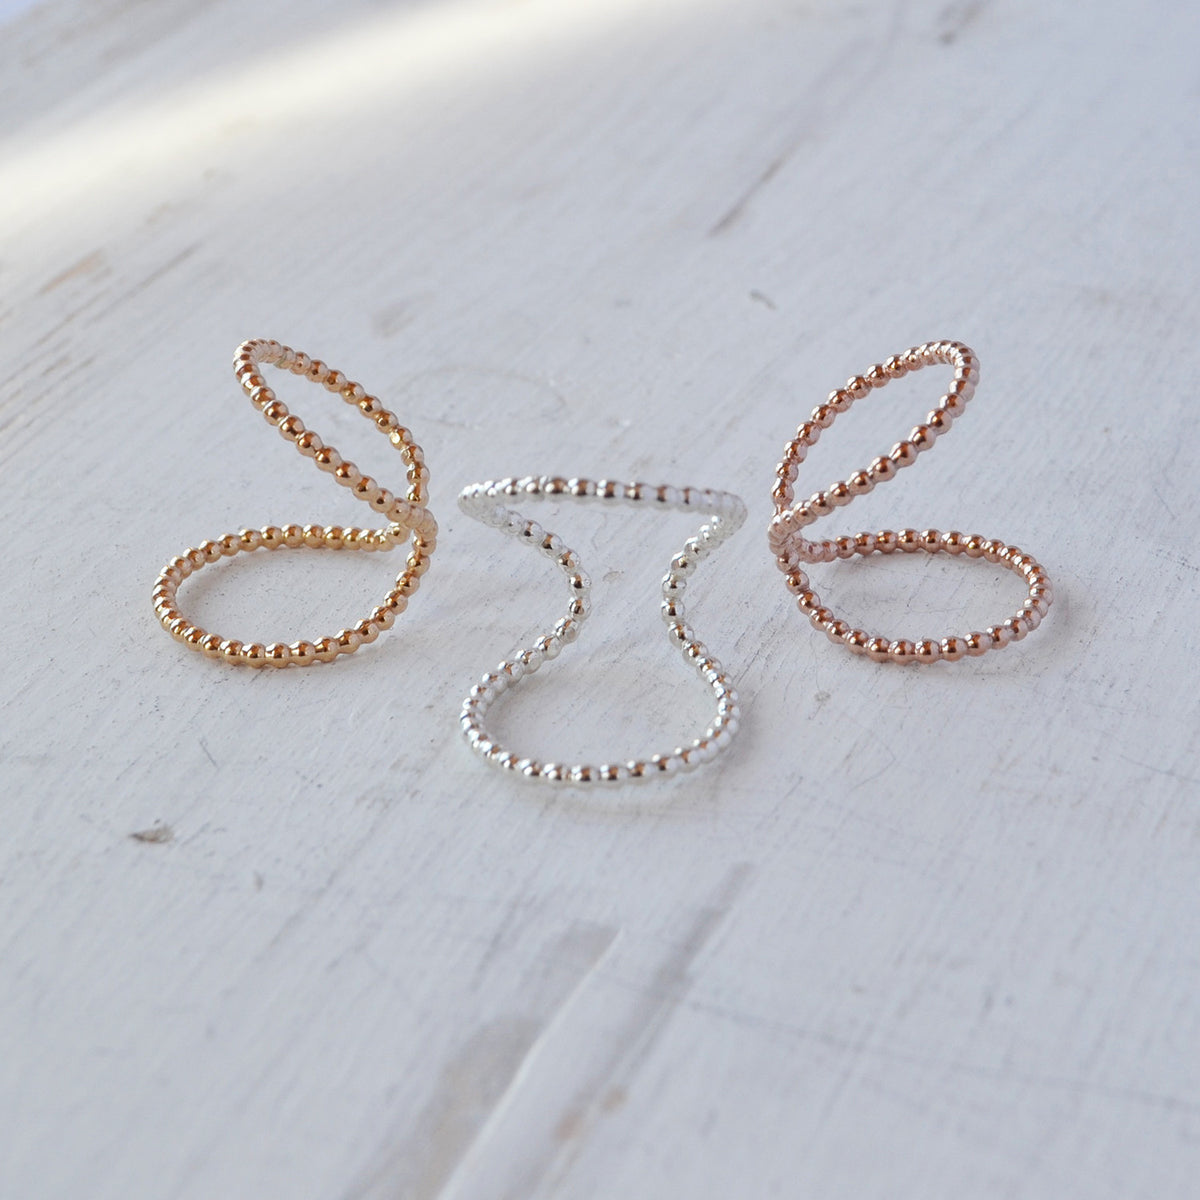 Beaded Double Knuckle Ring, Gold, Rose Gold, or Sterling Silver